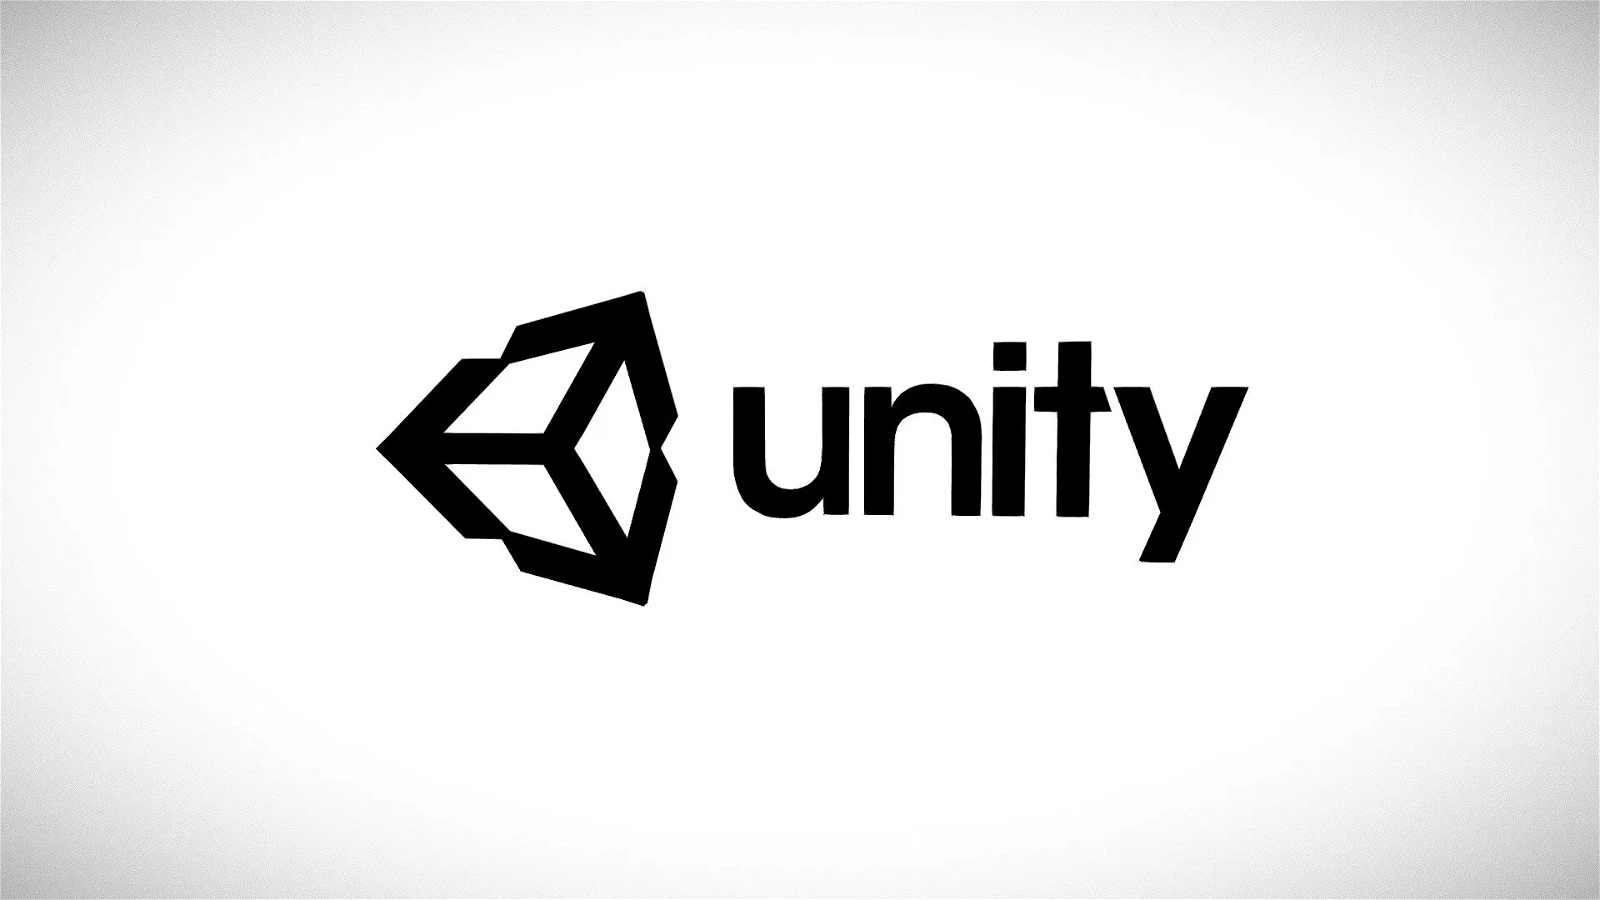 Unity clarifies its stance on its game engine charges announcement after extreme backlash from developers.